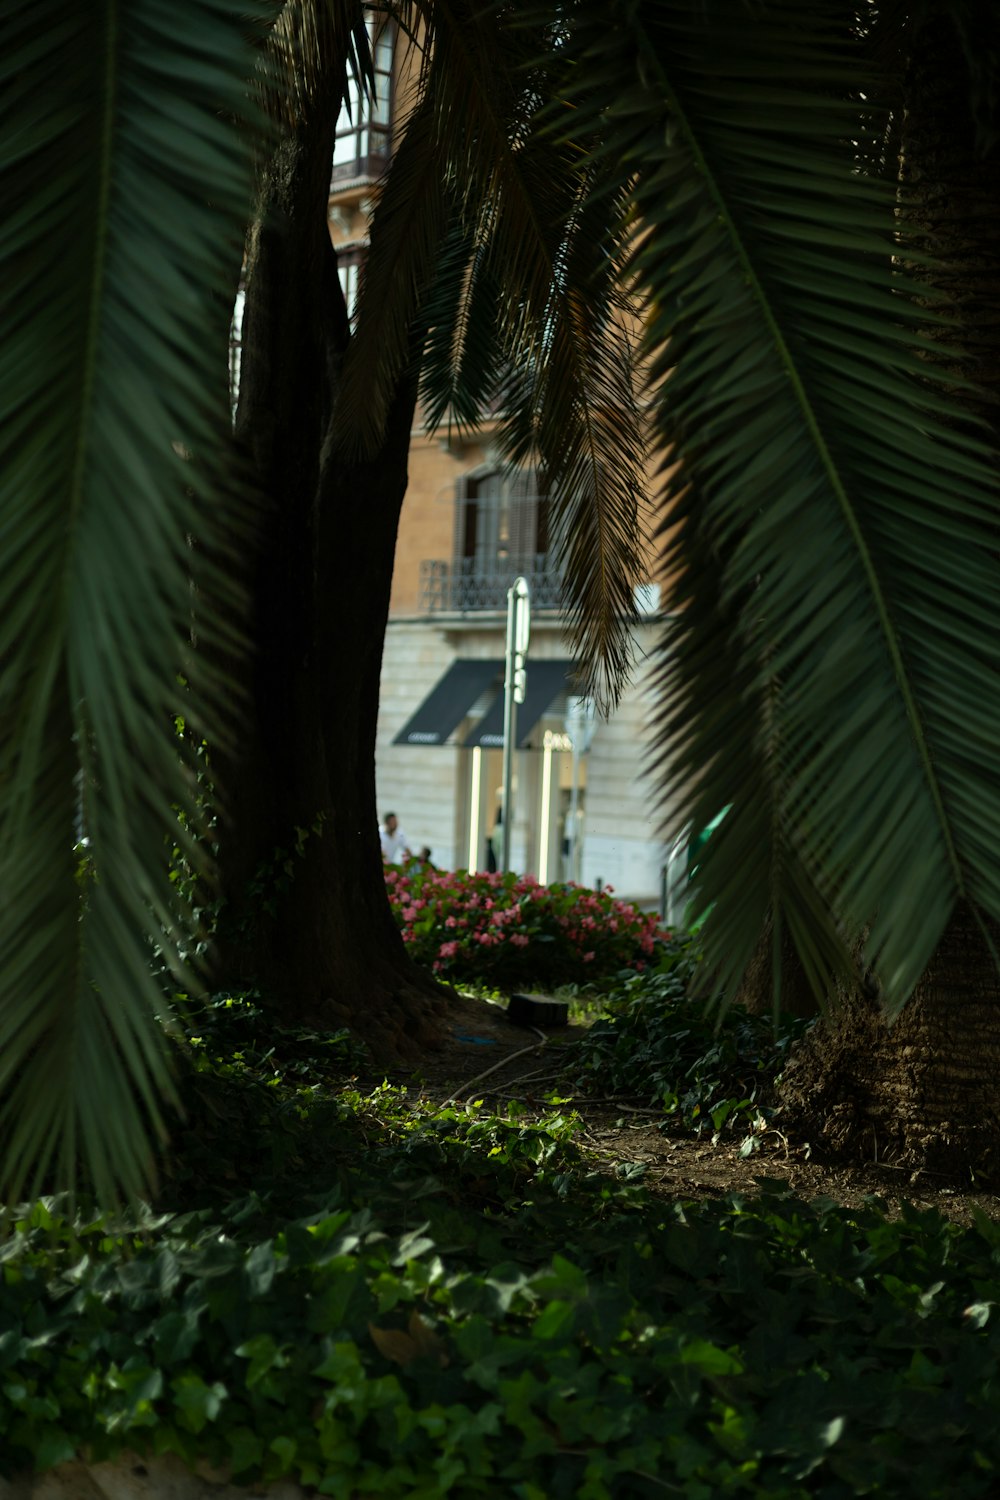 a person sitting on a bench under a palm tree